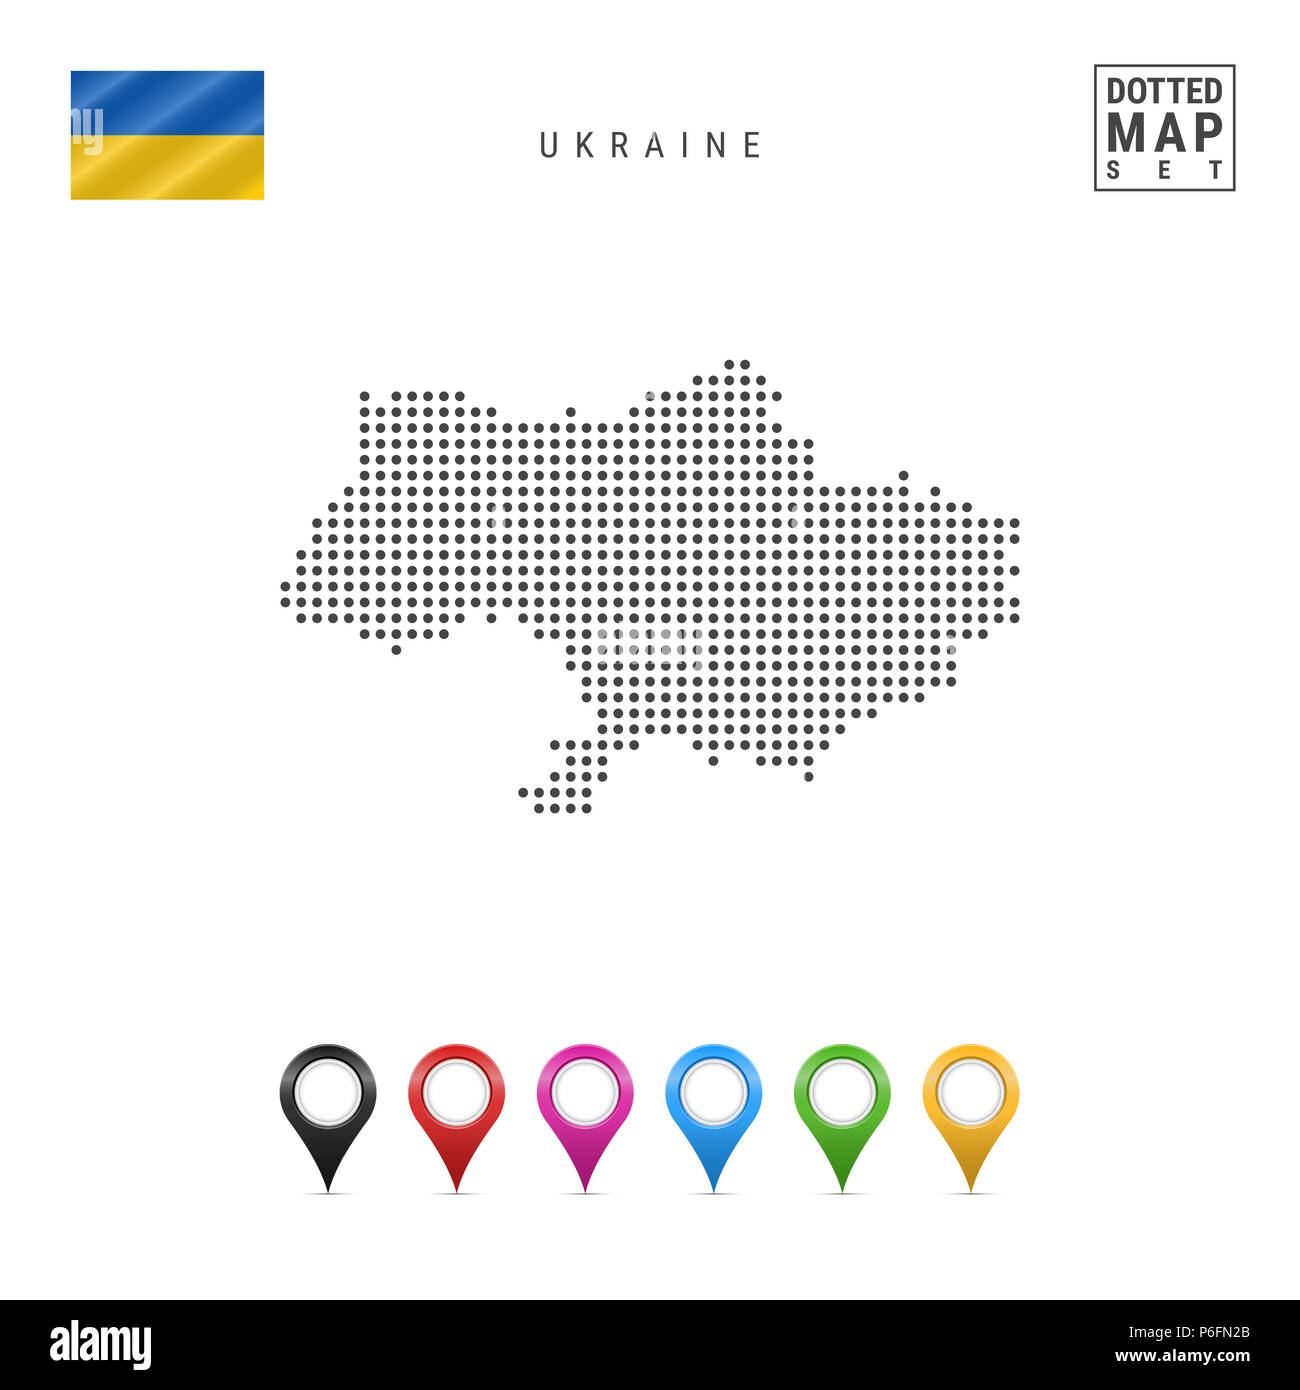 Dotted Map of Ukraine. Simple Silhouette of Ukraine. The National Flag ...